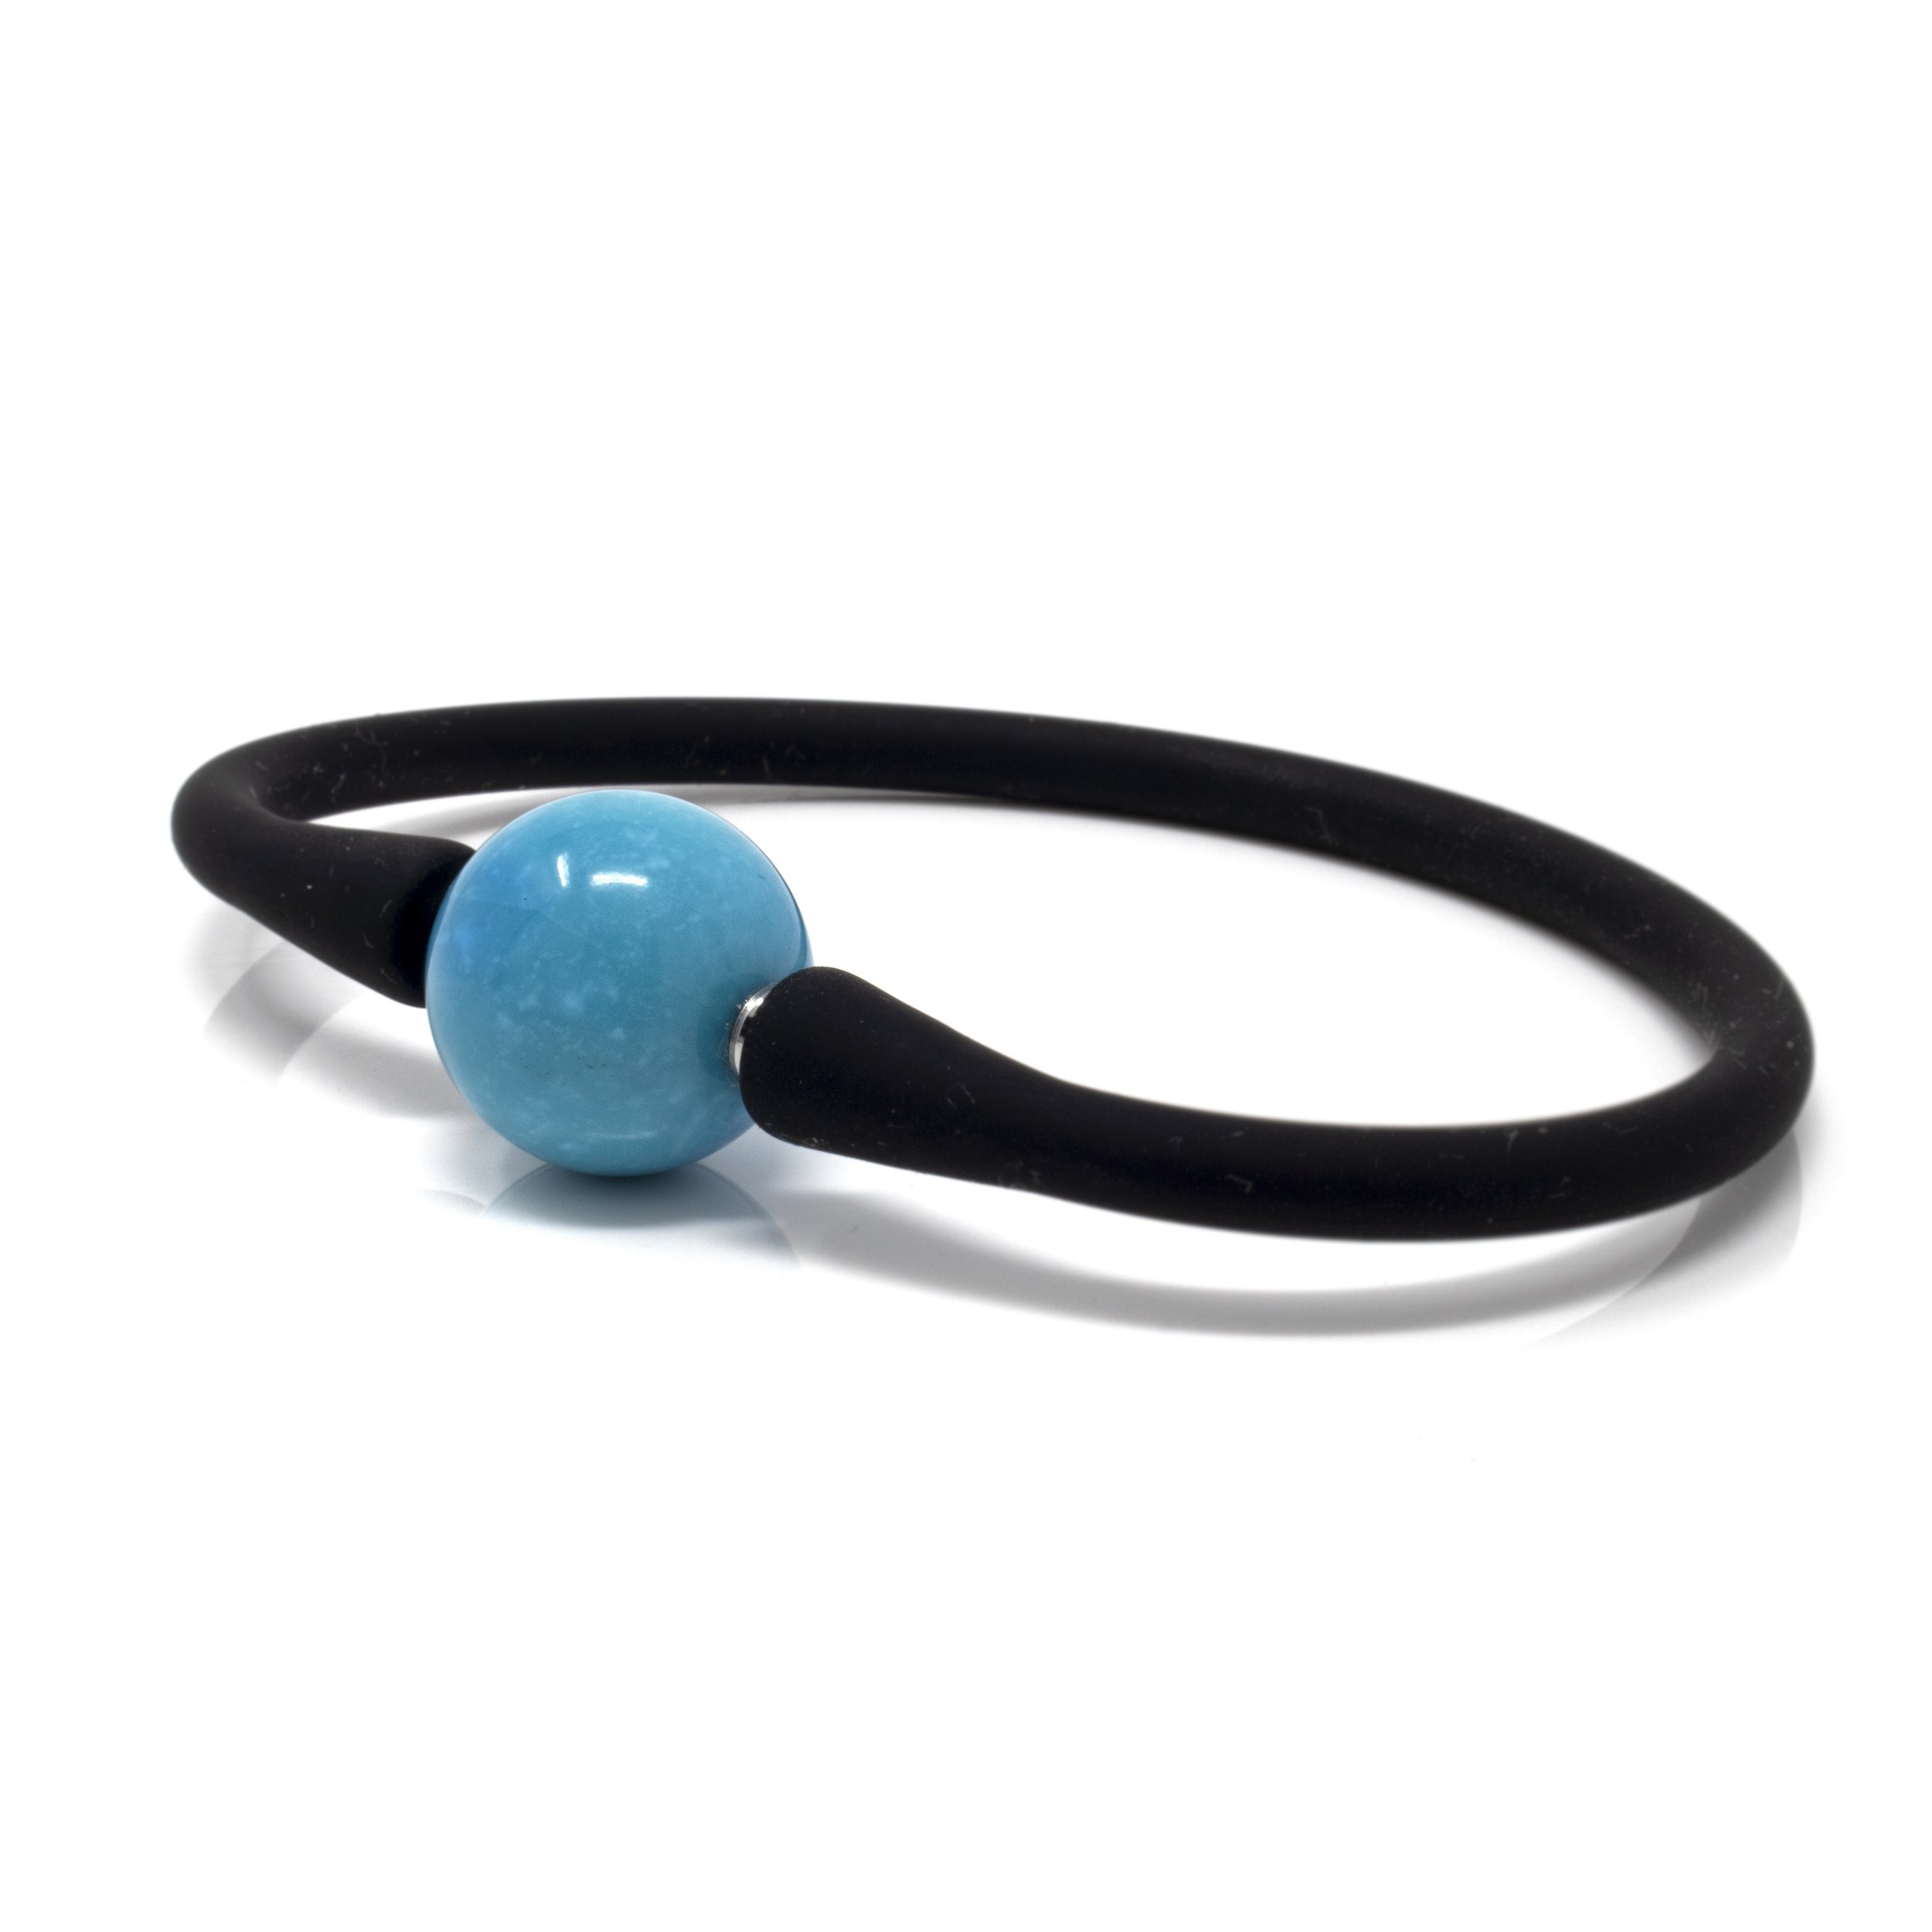 Turquoise Bracelet - Round Bead Set On Black Silicone Band - Rich Teal Hues With Matrix